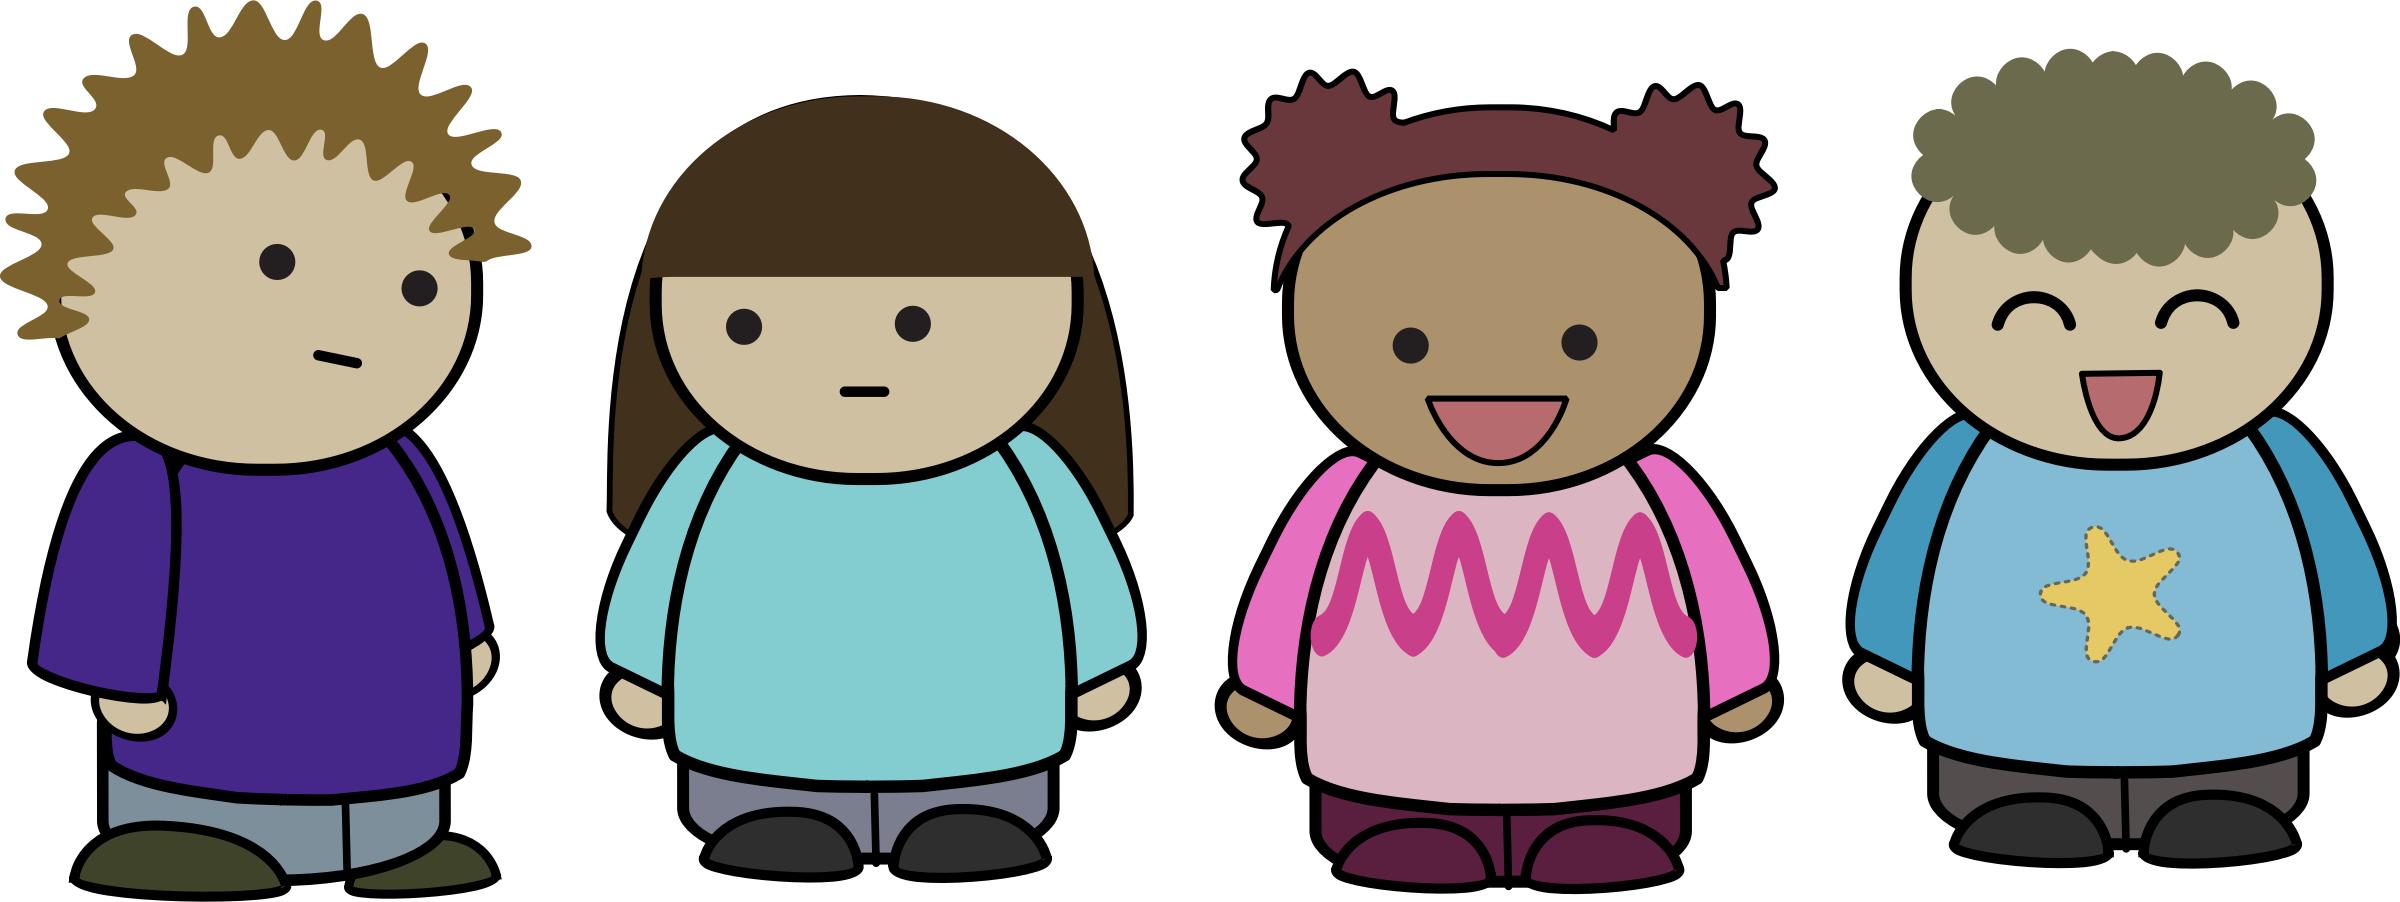 Mix and match characters png